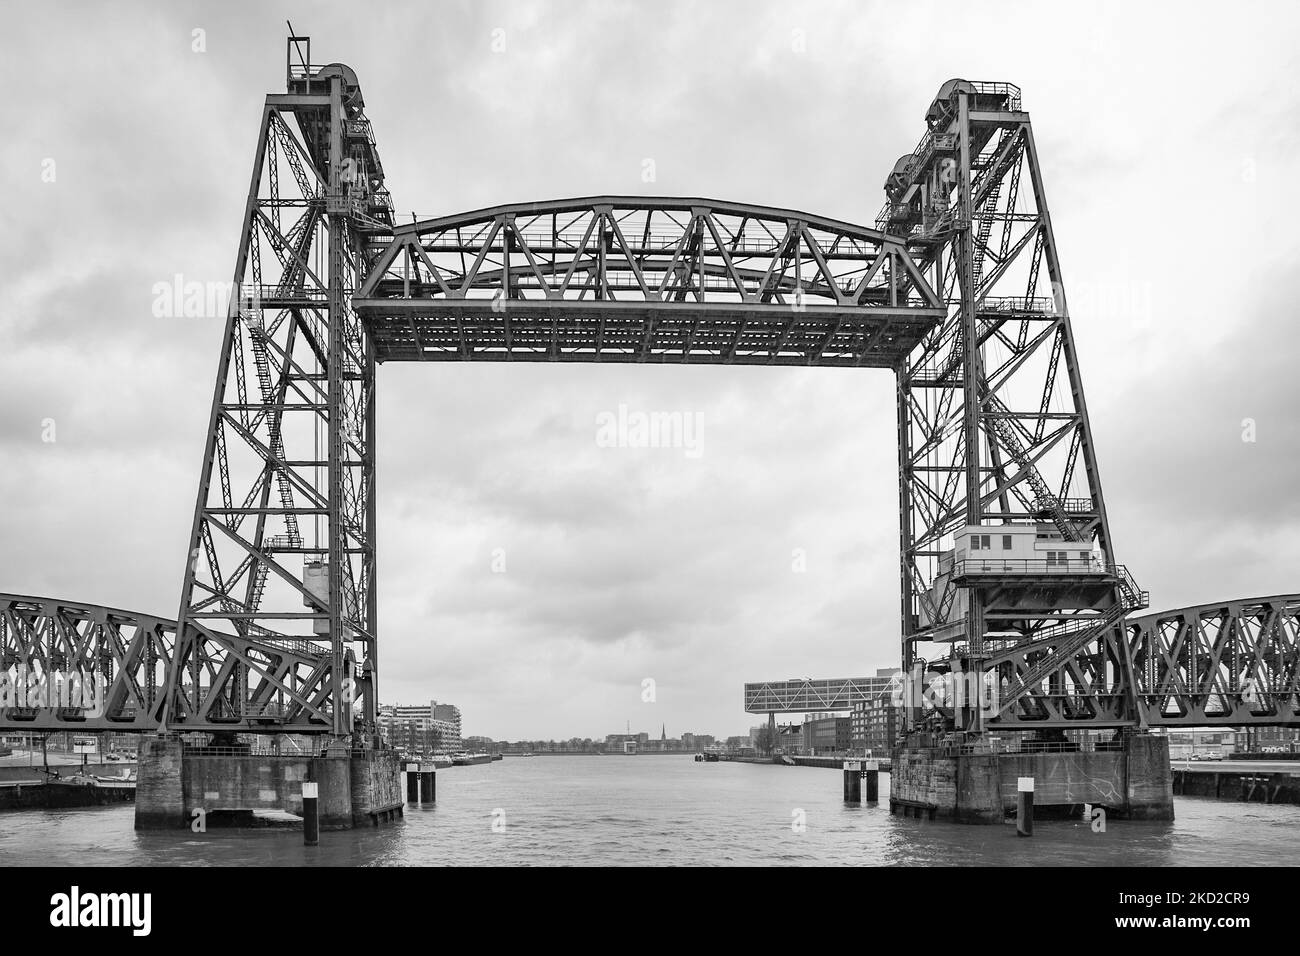 Black and White B/W image of the iconic historic De Hef - Koningshavenbrug Bridge in the Dutch port city of Rotterdam may be dismantled for Jeff Bezos superyacht to pass under, as the mast of the sailboat exceeds the height of the bridge. The two-tower with swing lift bridge is an old level steel railroad bridge connecting the island, Noordereiland in the Maas river in the Southern part of Rotterdam. The bridge was built in 1877 and suffered damage during the 1940 German bombings. Since 2017 after the renovation work, the municipality promised that the bridge would never be dismantled again. T Stock Photo